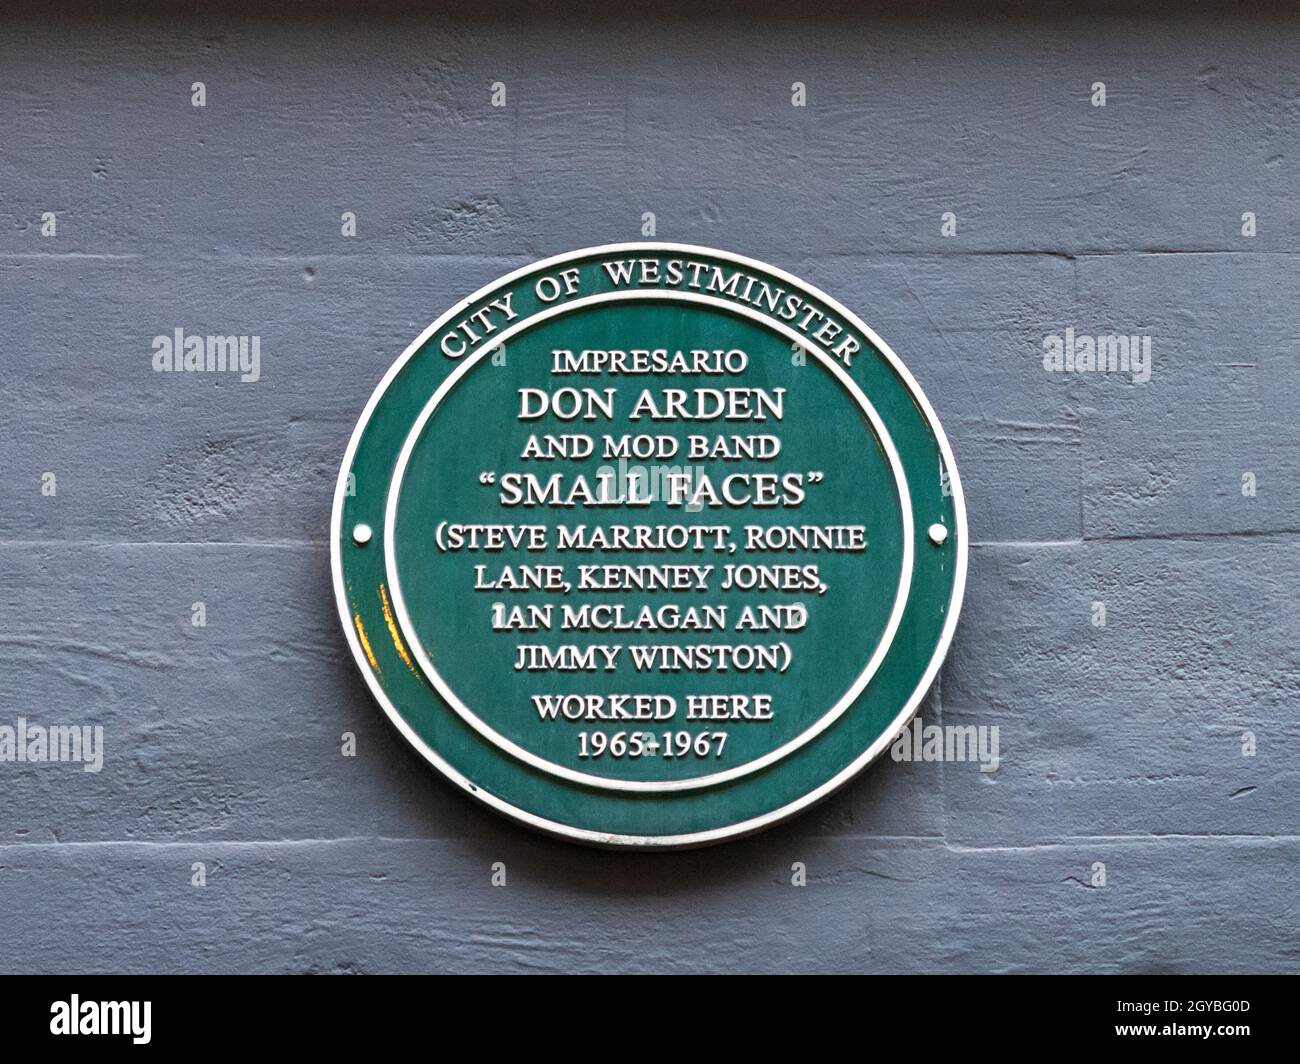 Small Faces Memorial Plaque Carnaby St London - City of Westminster Green Plaque - Don Arden and the Small Faces worked here 1965-1967 Stock Photo